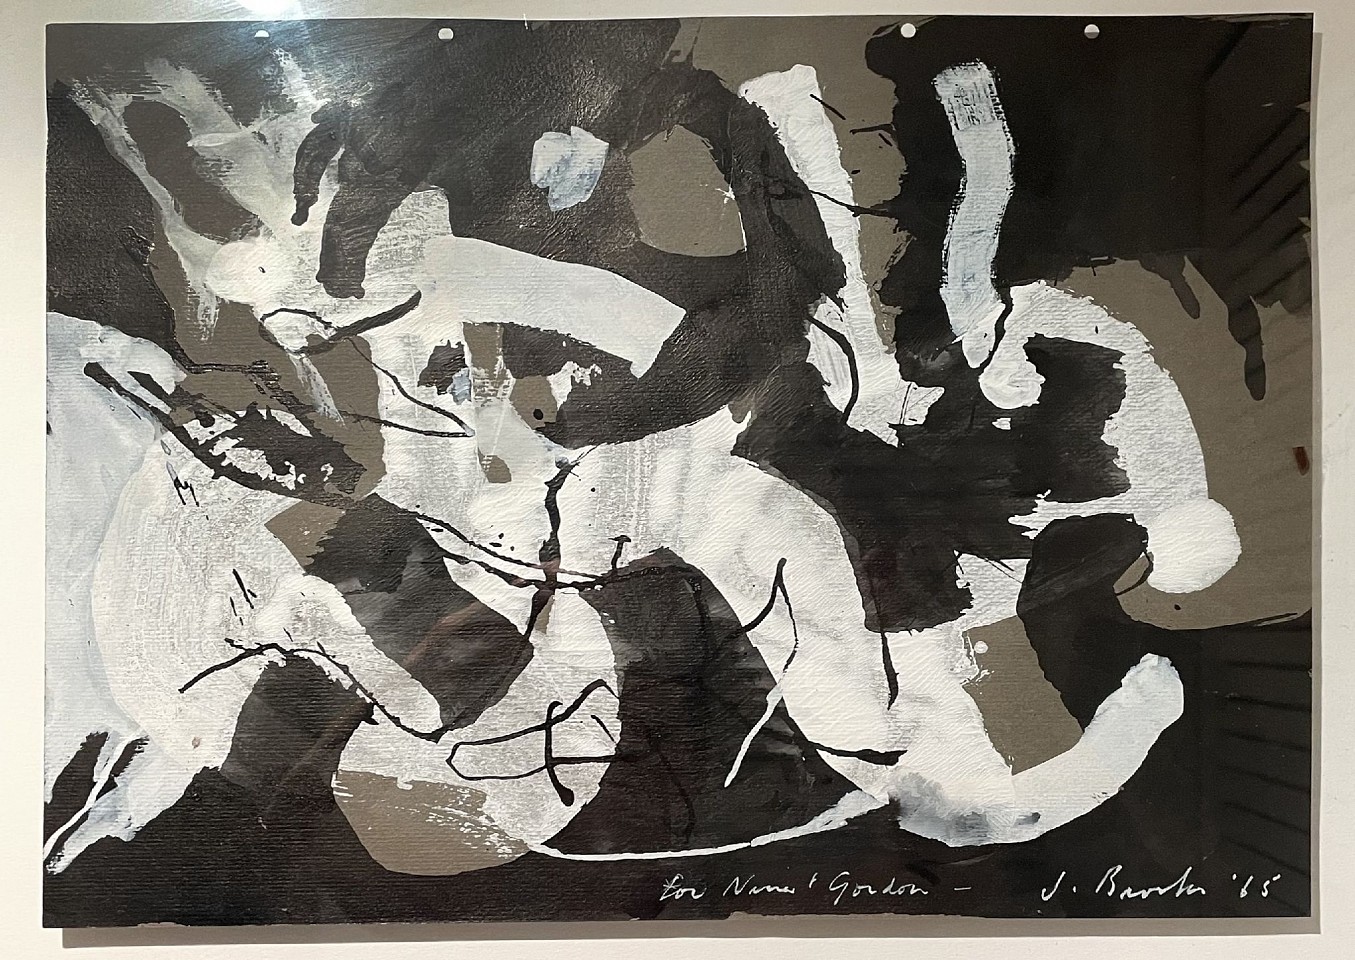 James Brooks, Untitled, 1965
Gouache and mixed media on paper, 11 3/4 x 15 3/4 in.
BROO00001